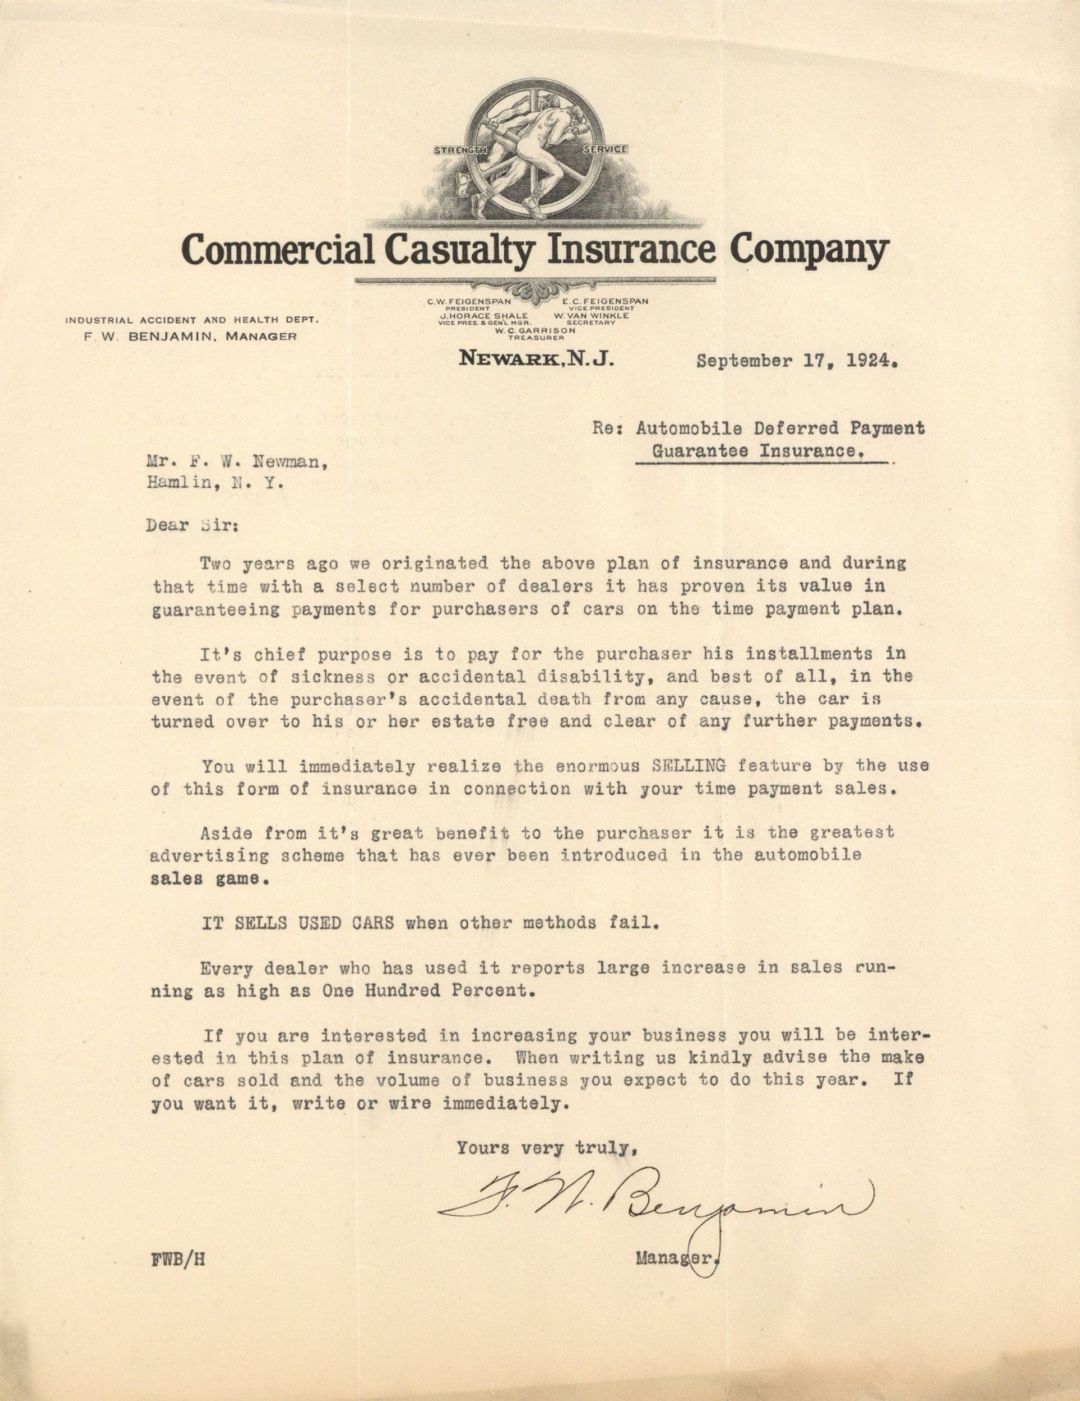 Commercial Casualty Insurance Co. Letter -  Insurance